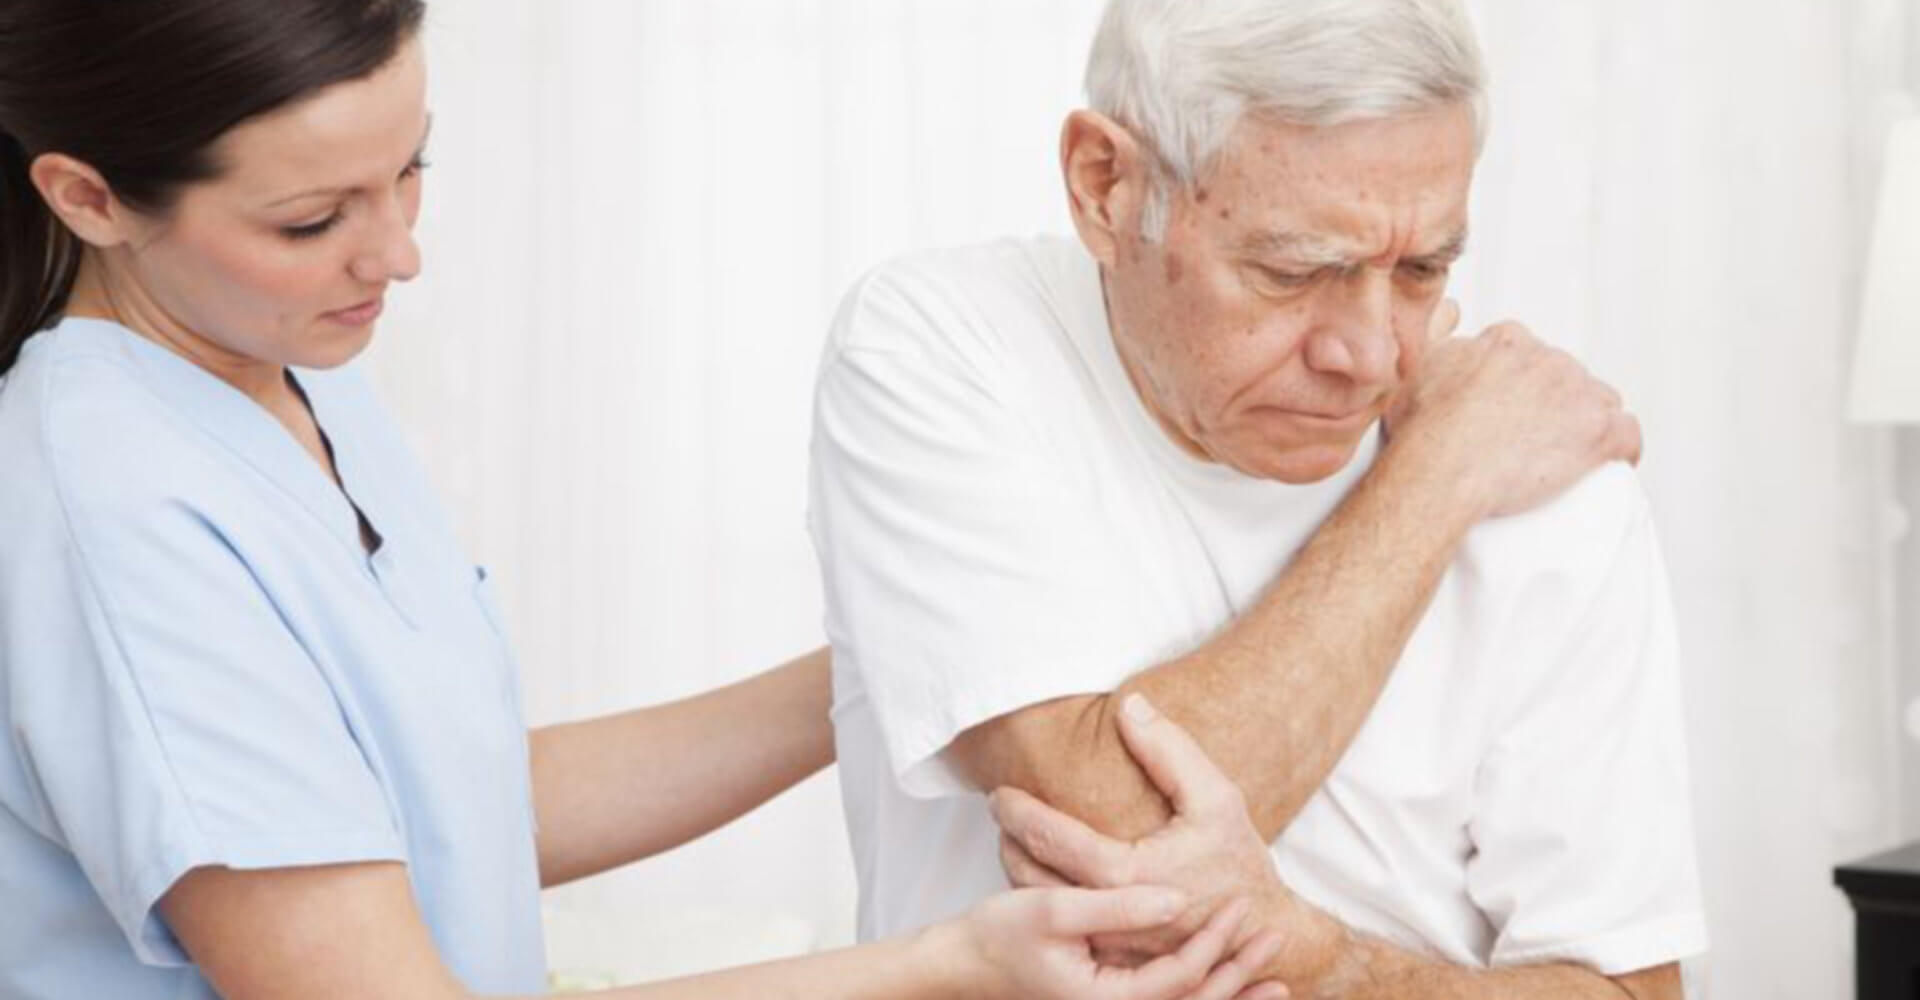 nurse comforting an old man who is ill